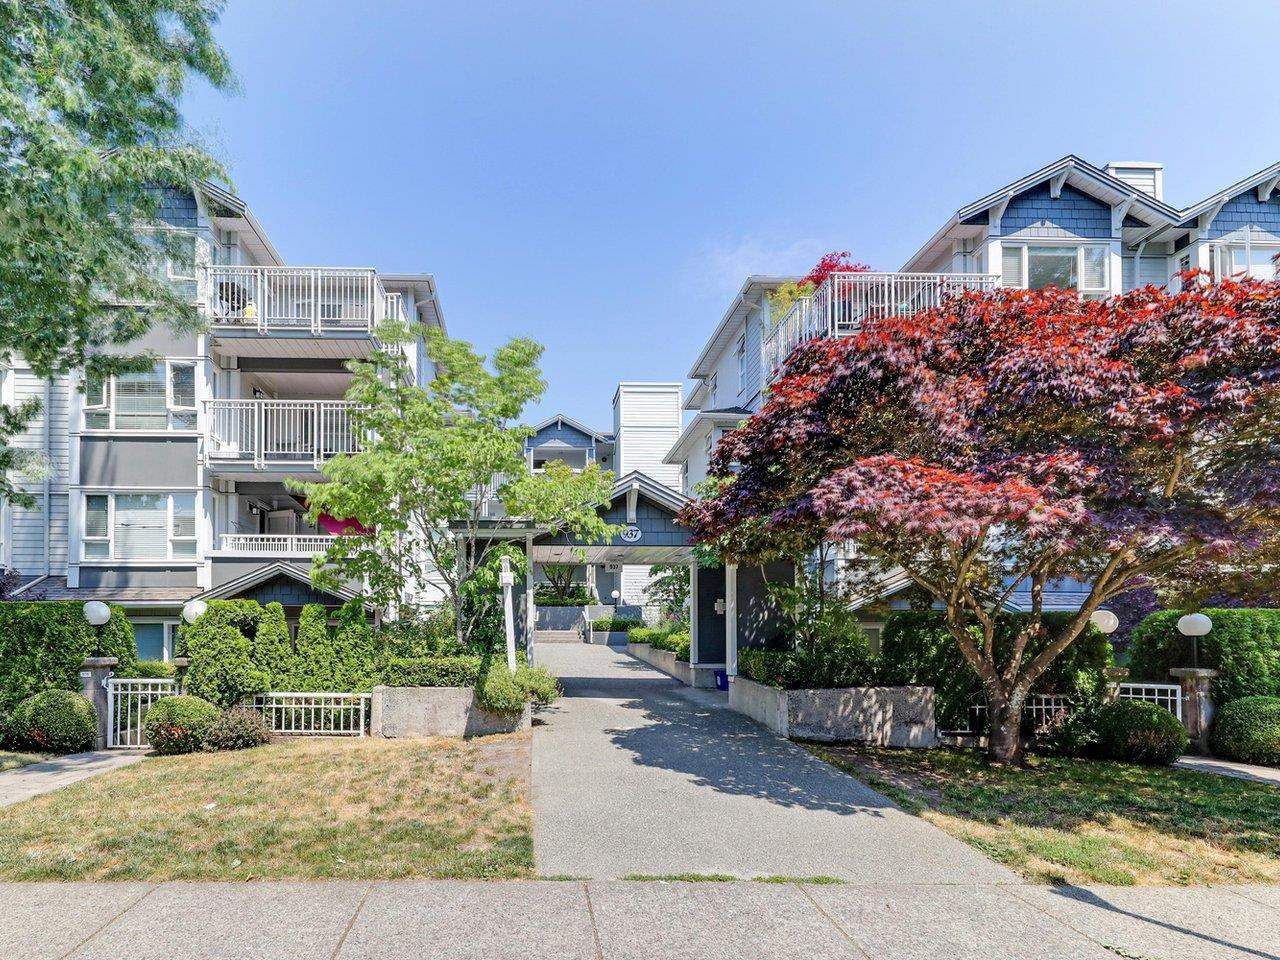 I have sold a property at 307 937 14TH AVE W in Vancouver
